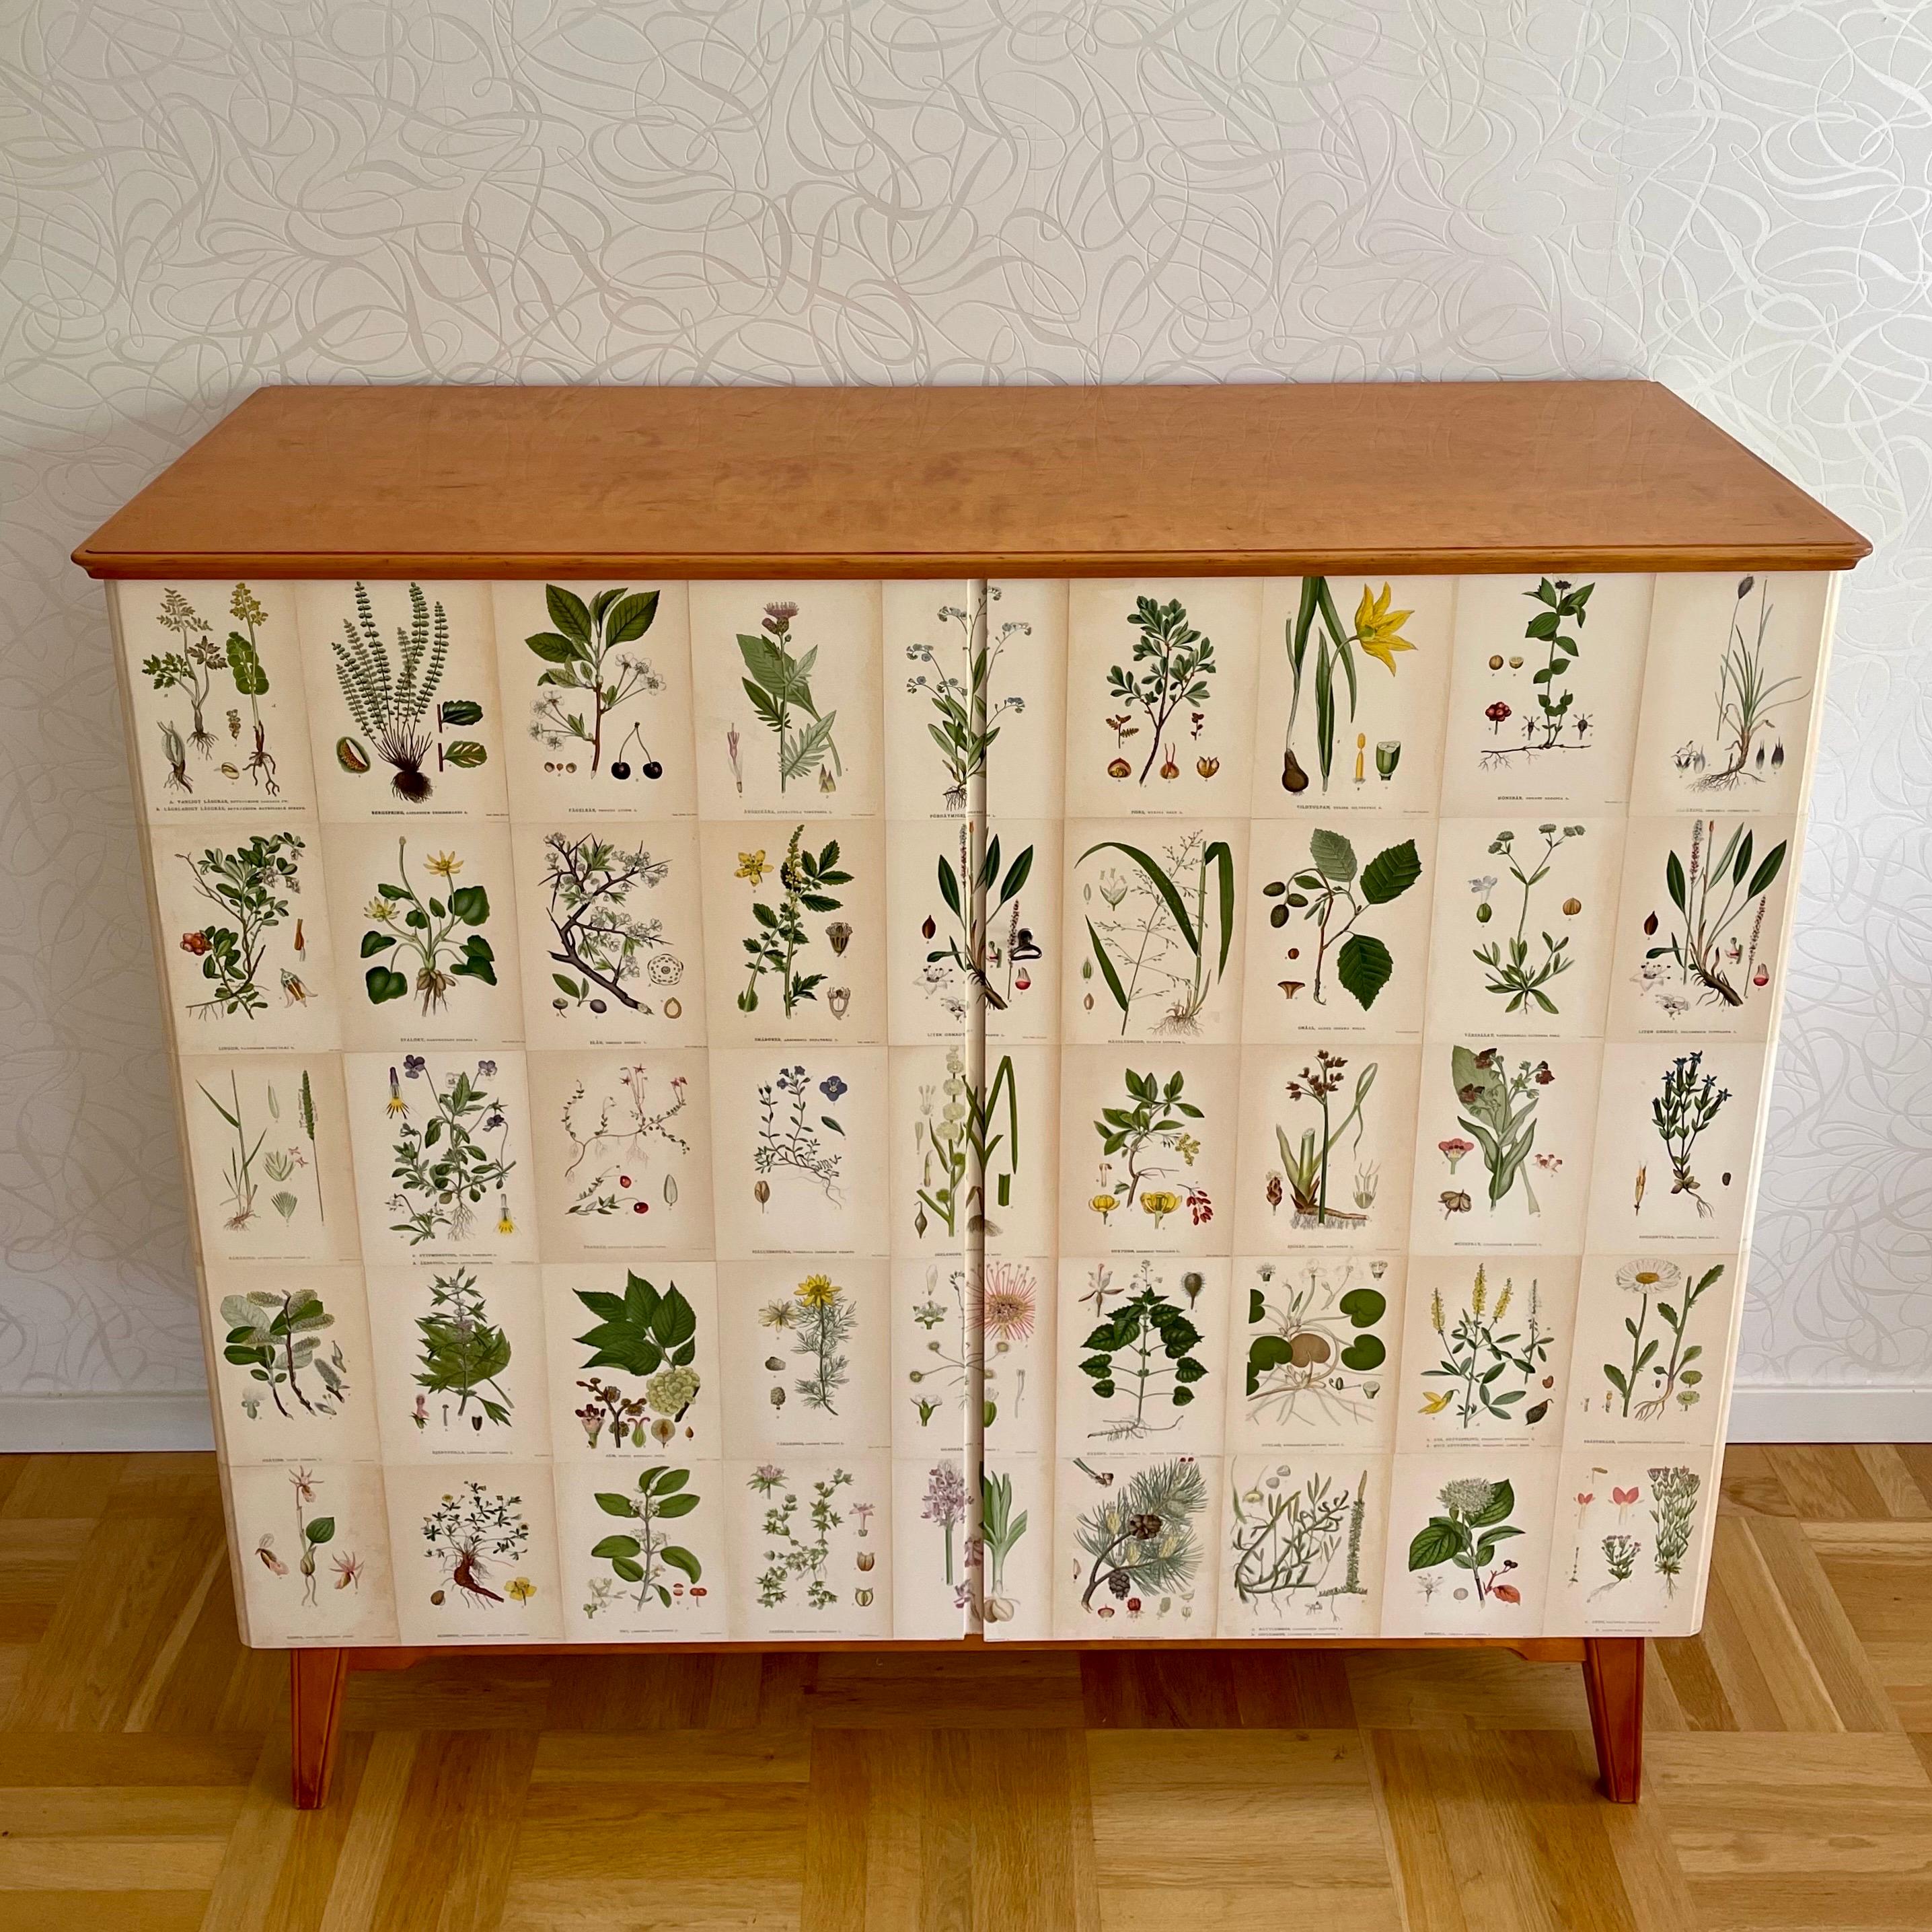 This is a Swedish Modern 1940s birch cabinet decorated with antique floral lithographs in Josef Frank style. 

It comes with clear coat birch veneered top, doors and sides decorated with pages from an antique botanical encyclopedia, 